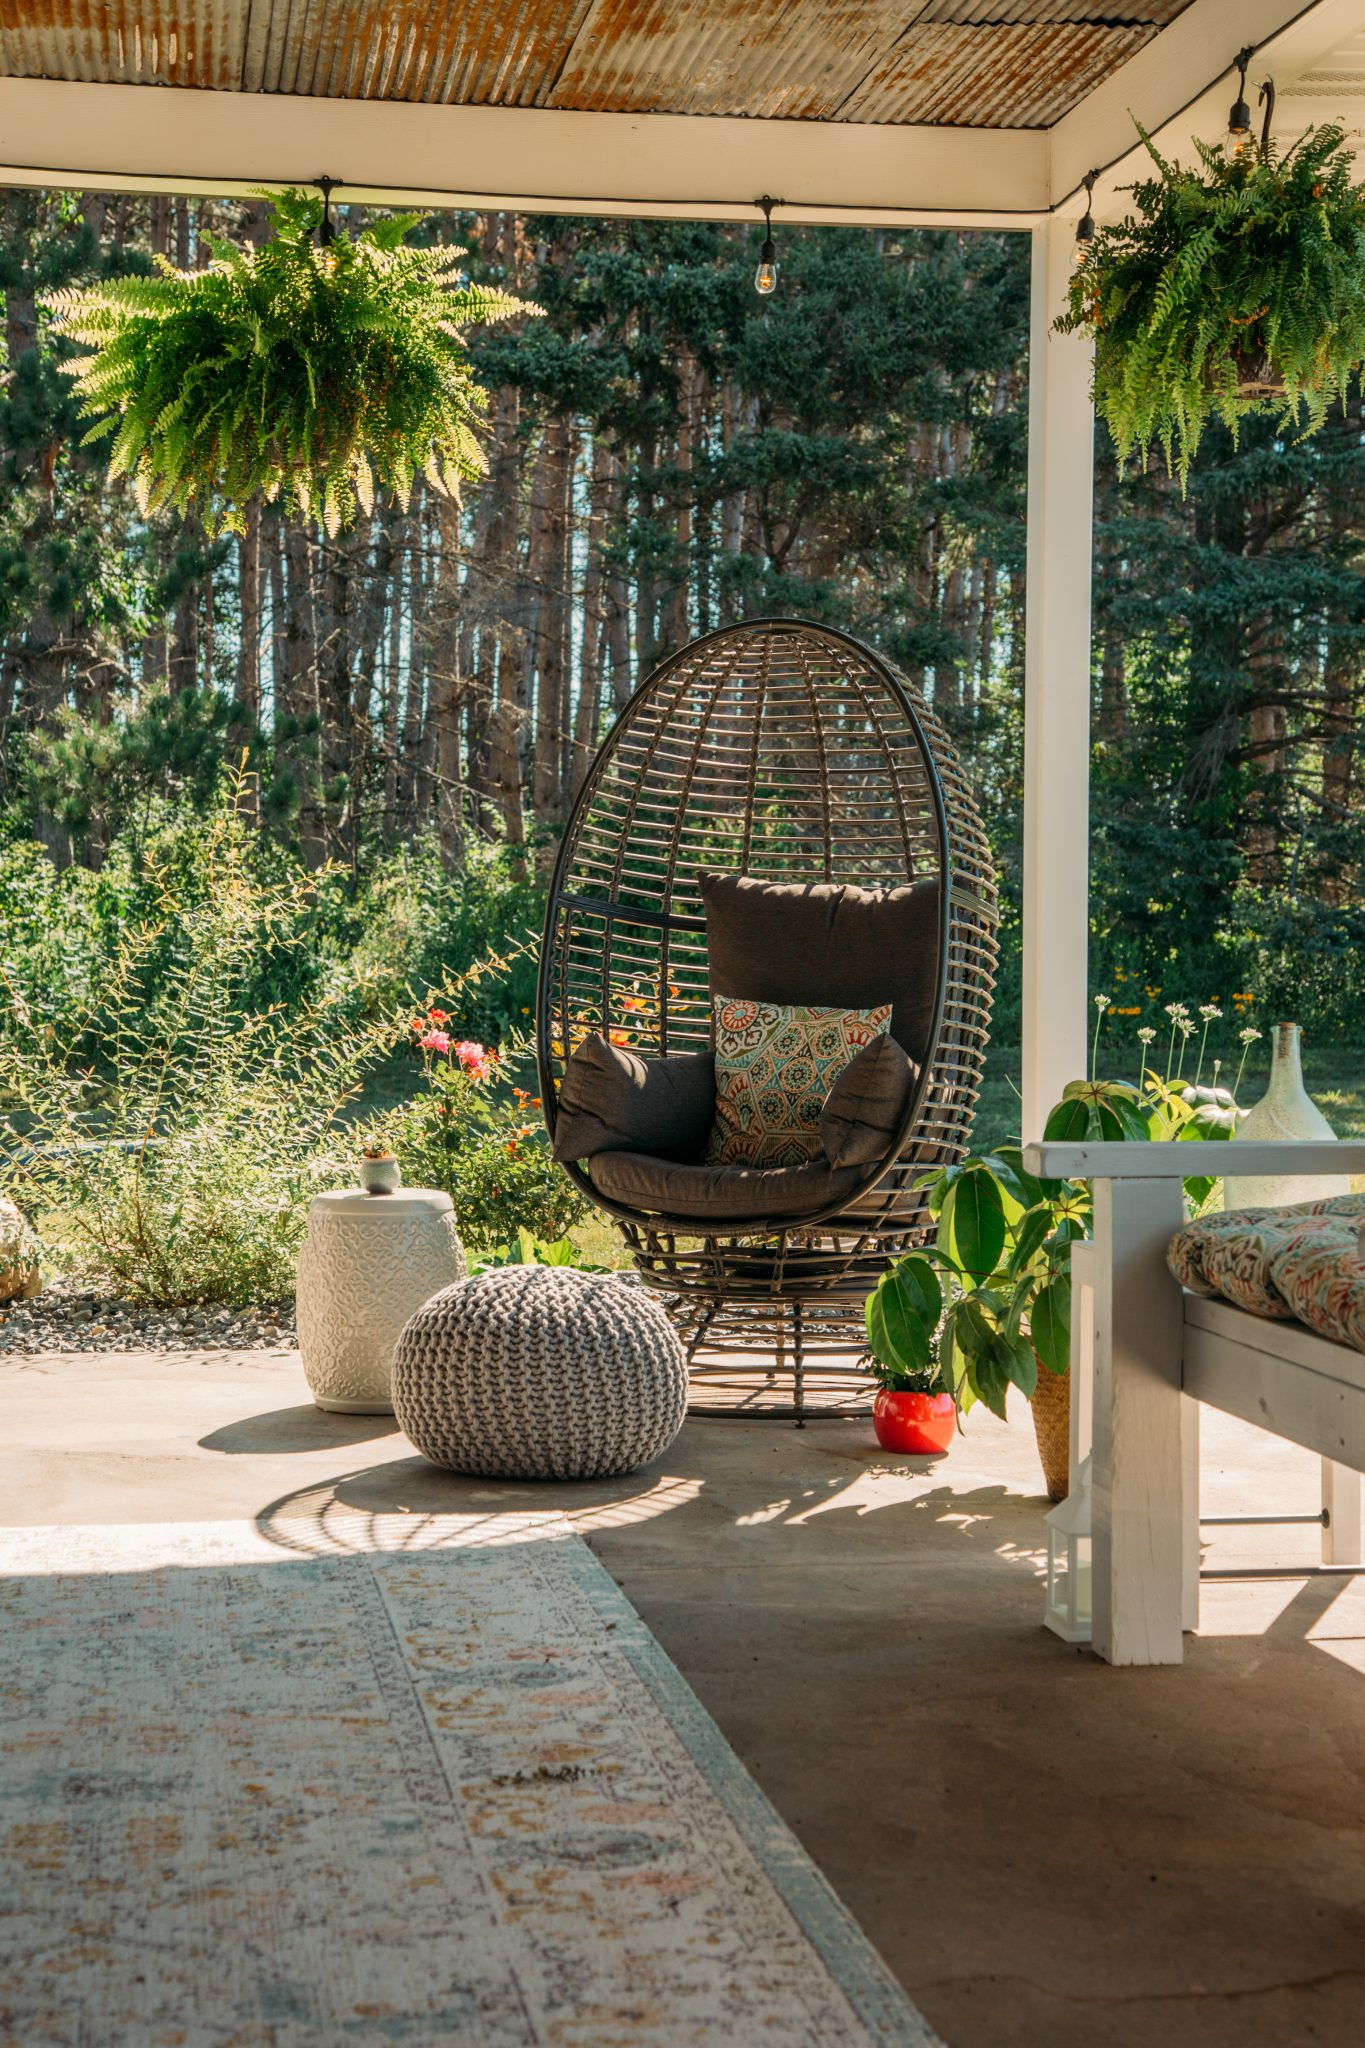 21 Awesome Cheap Egg Chairs That Won’t Break the Bank